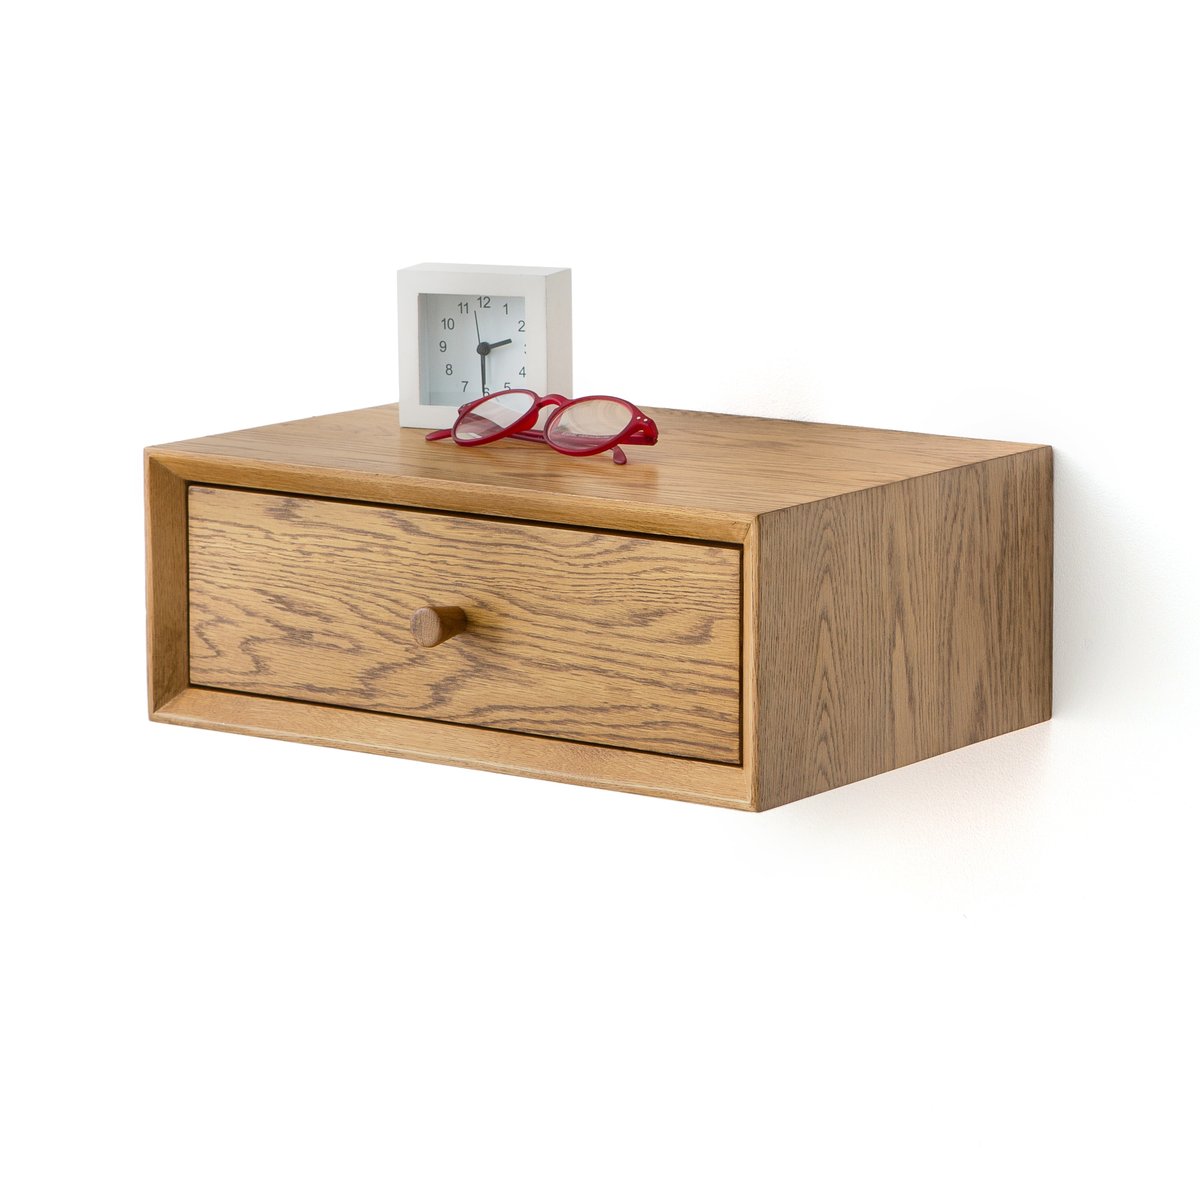 Image of QUILDA wall-mounted bedside table